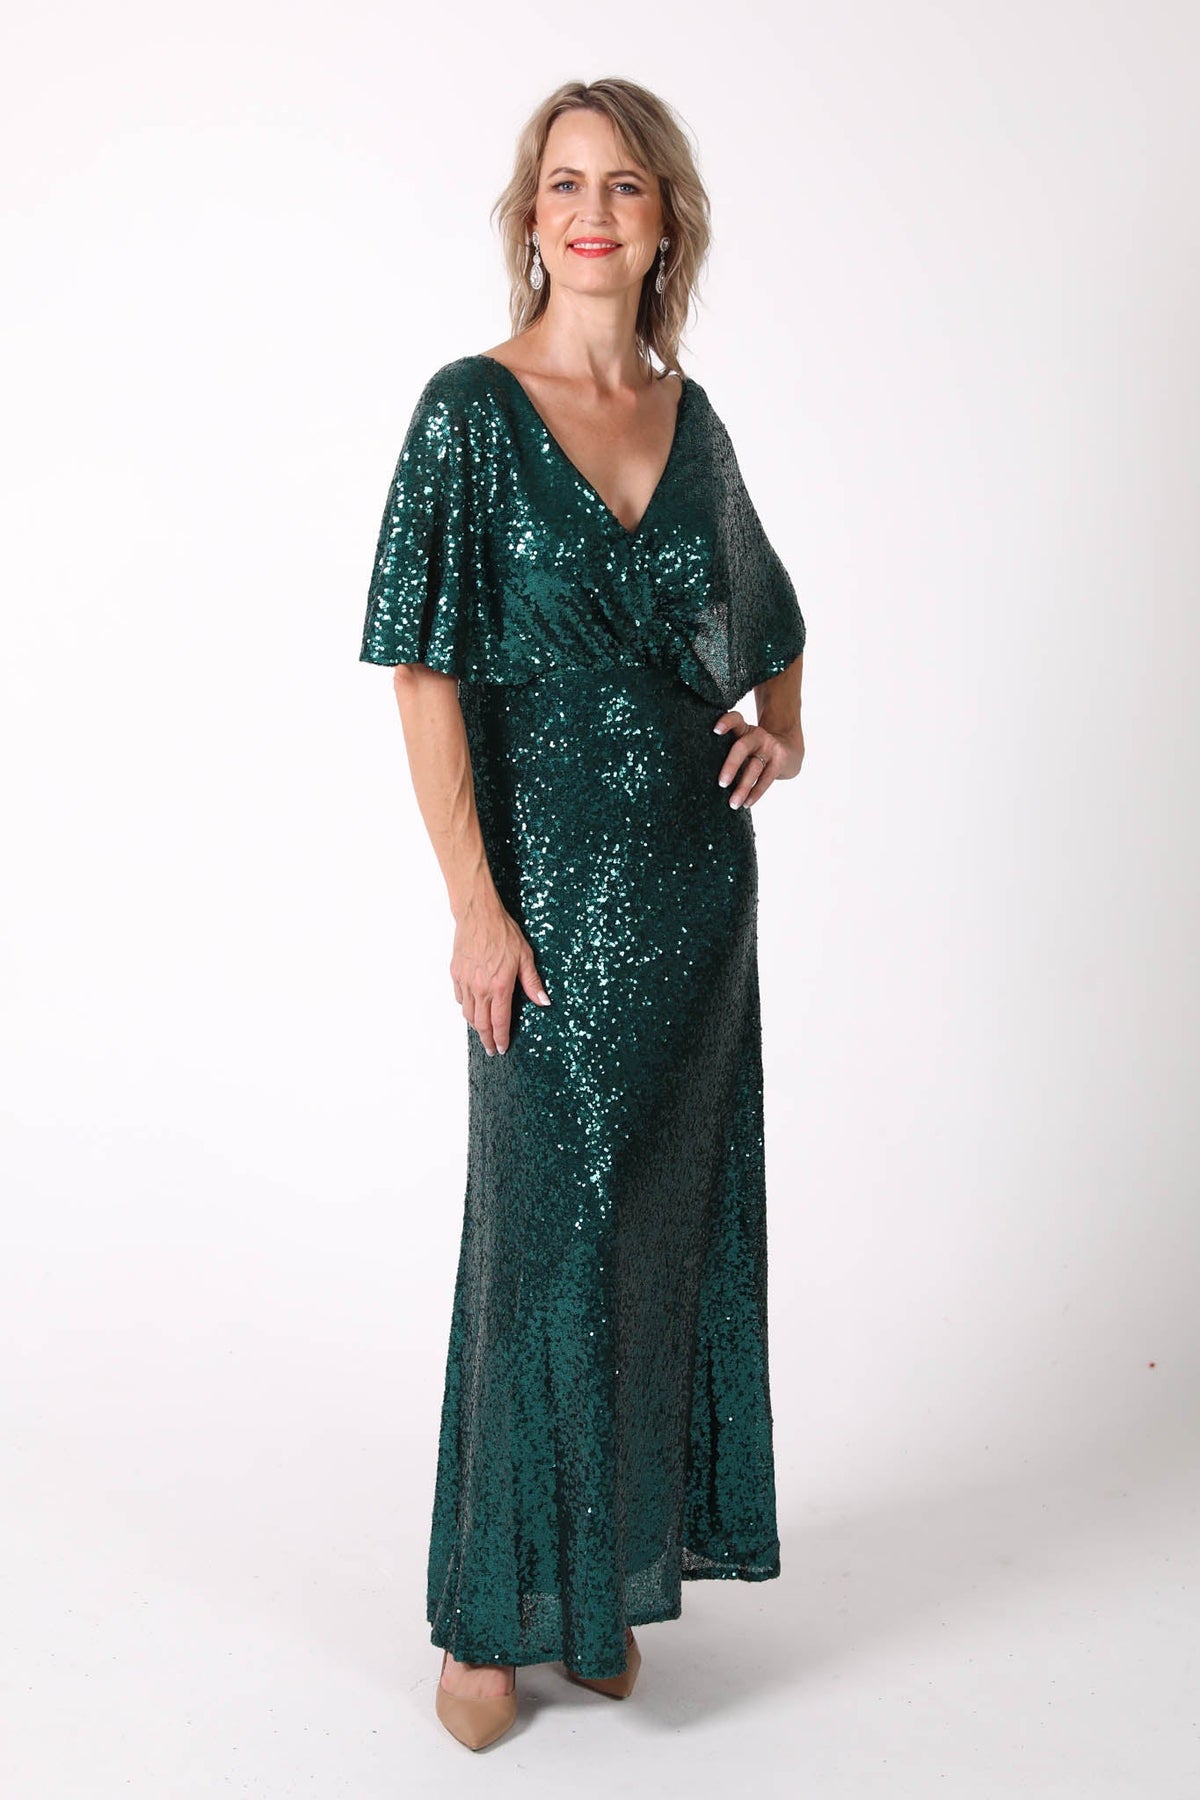 Mature woman sequin maxi dress with V neckline, butterfly sleeves in emerald green